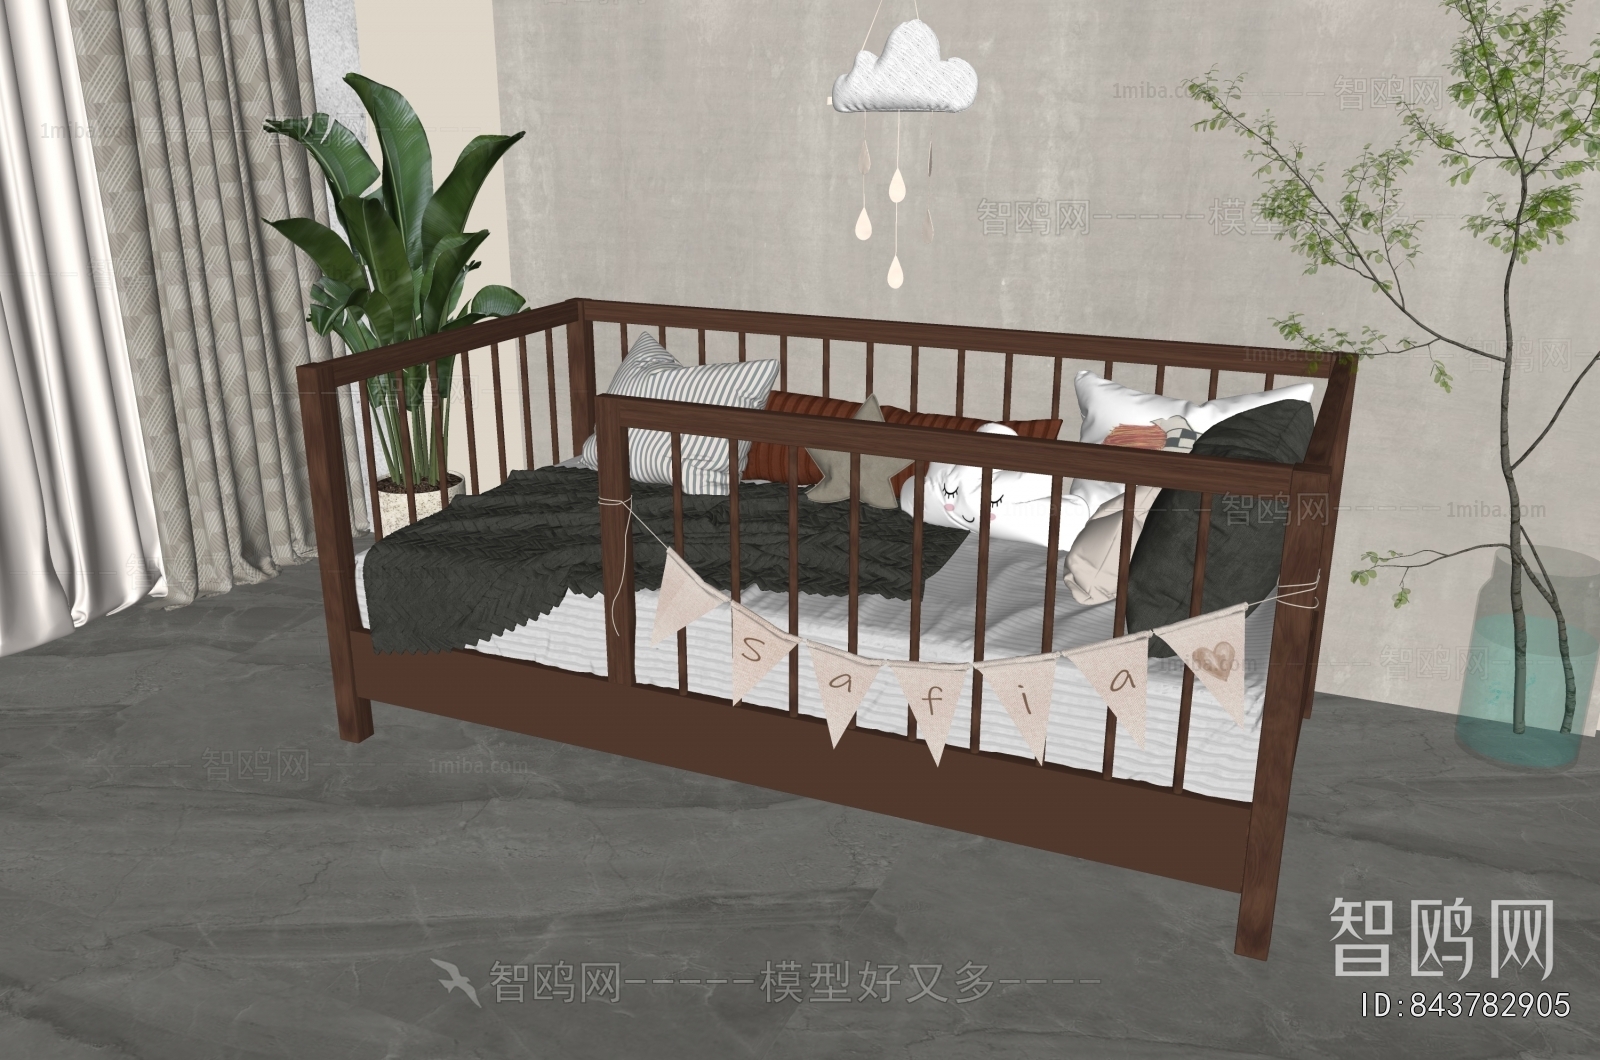 Nordic Style Child's Bed